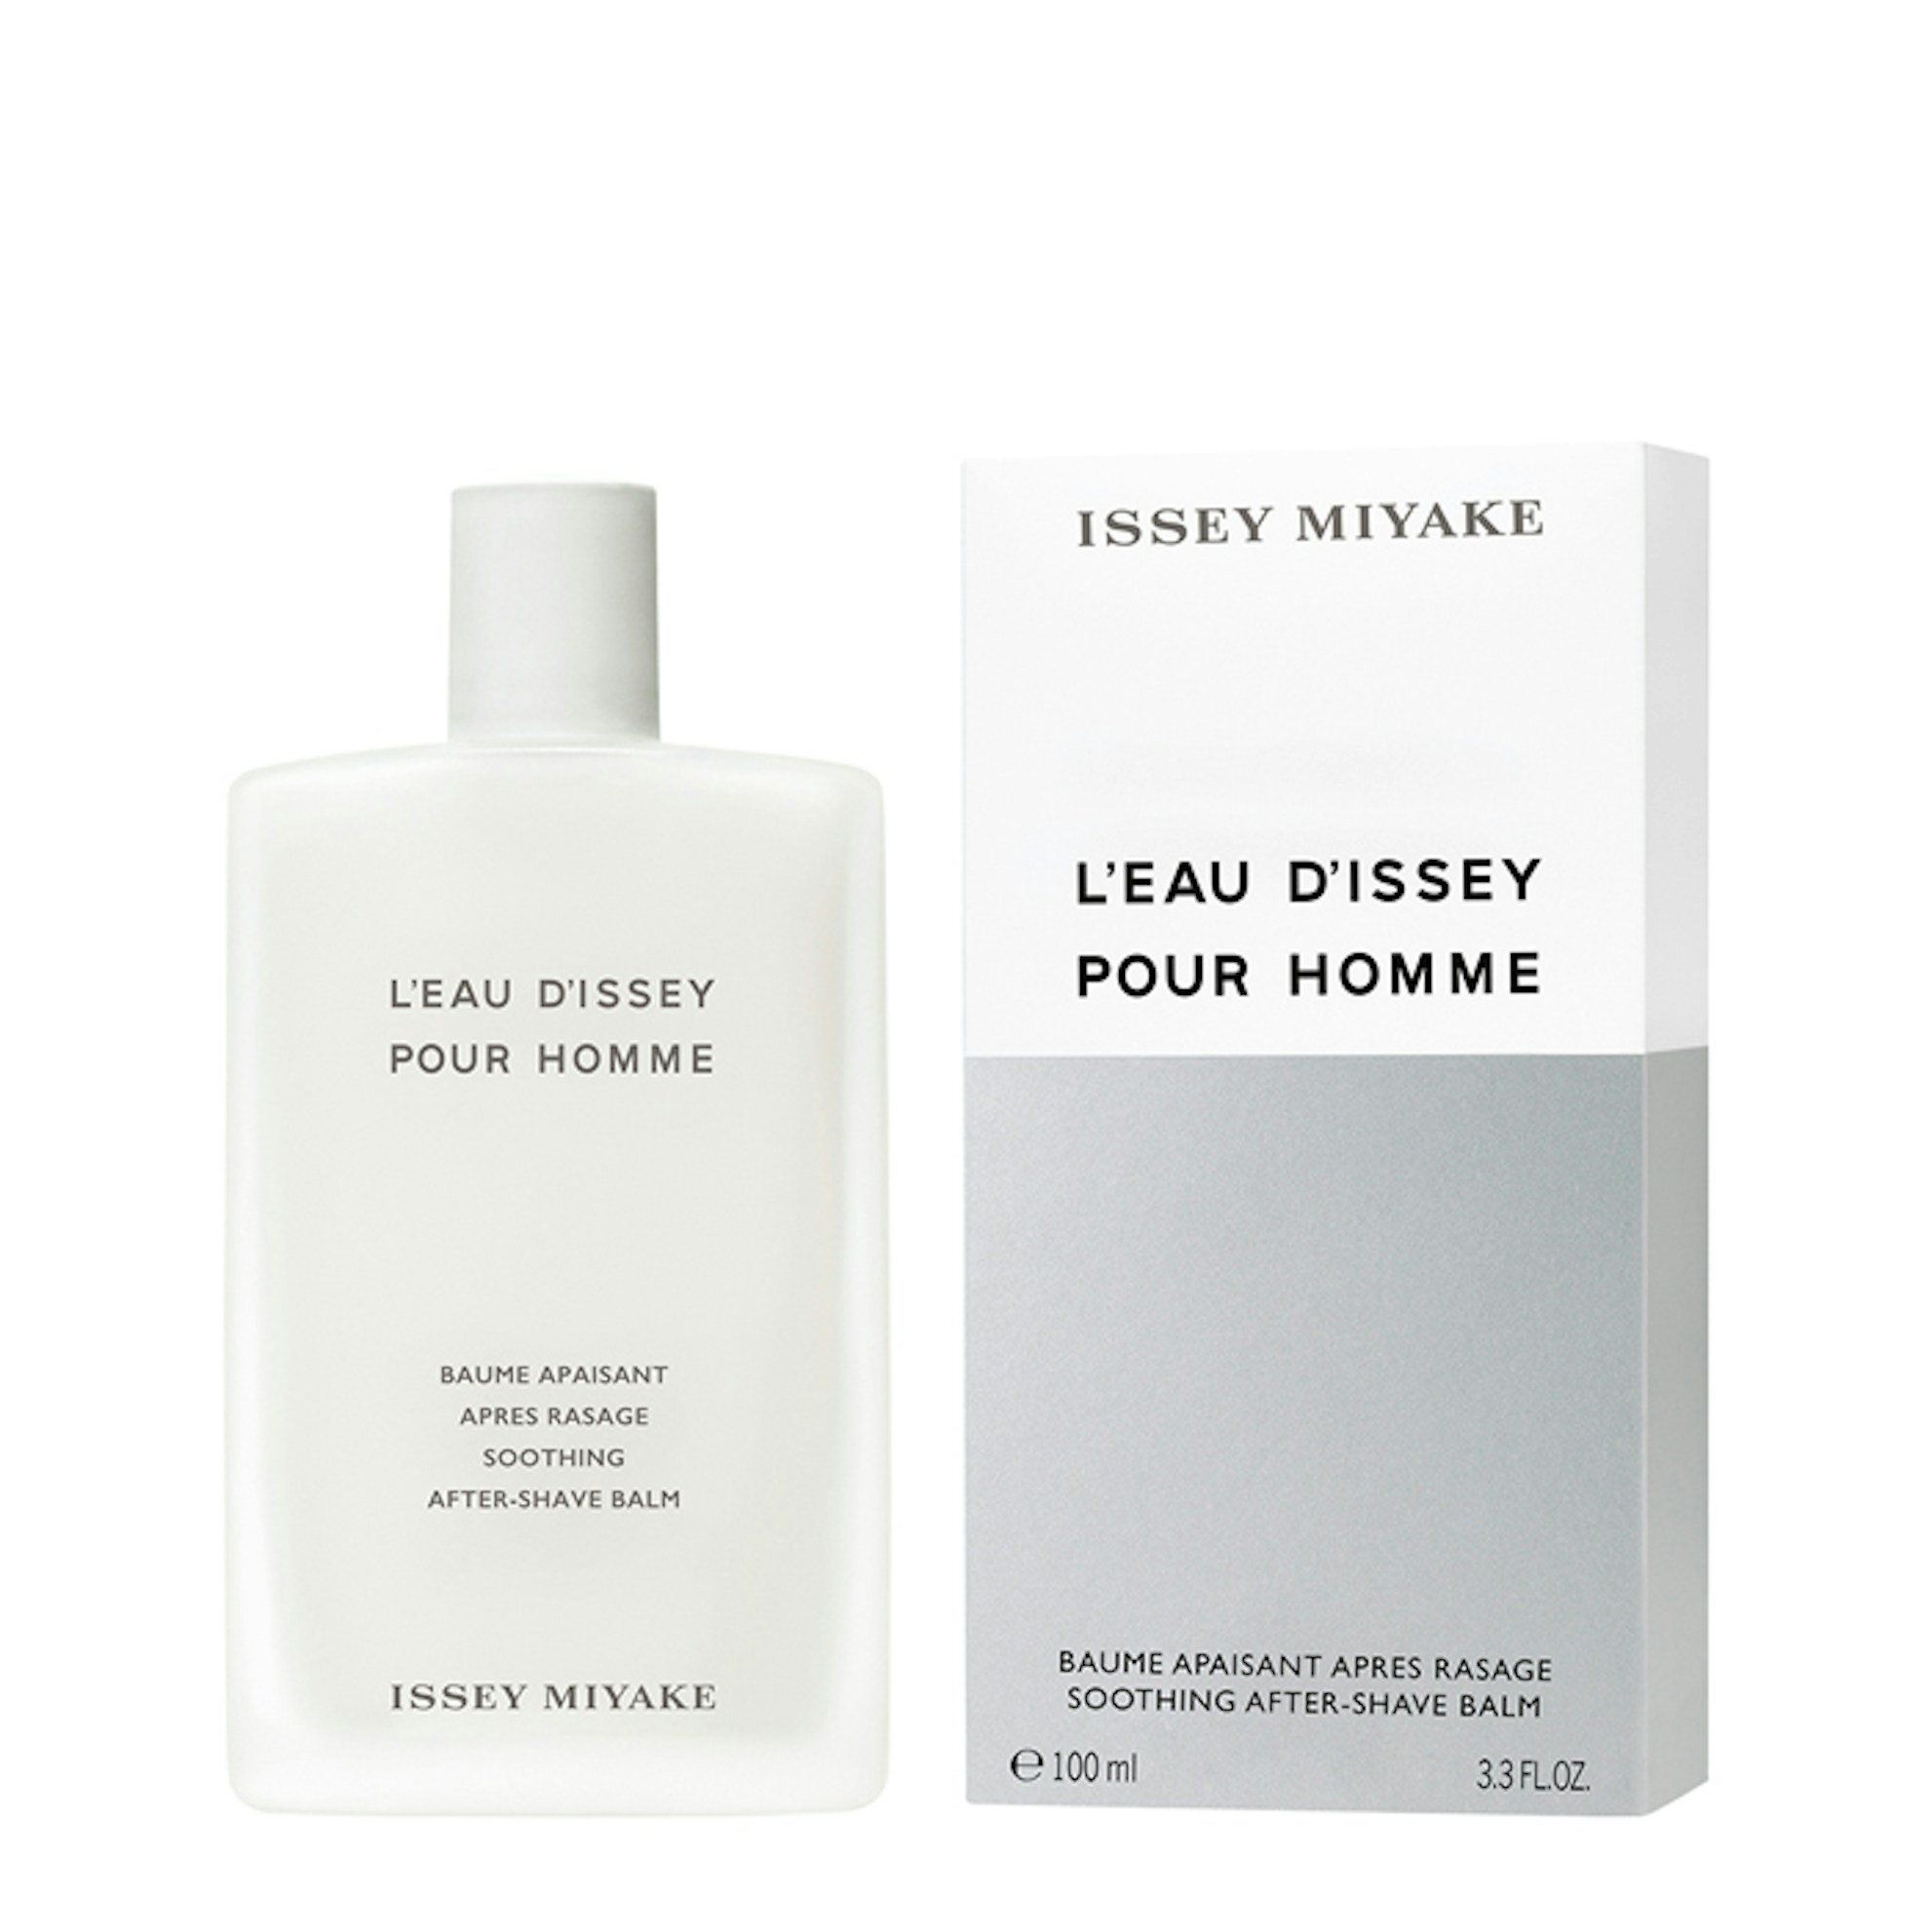 Issey Miyake 100ml Aftershave Balm | The Fragrance Shop